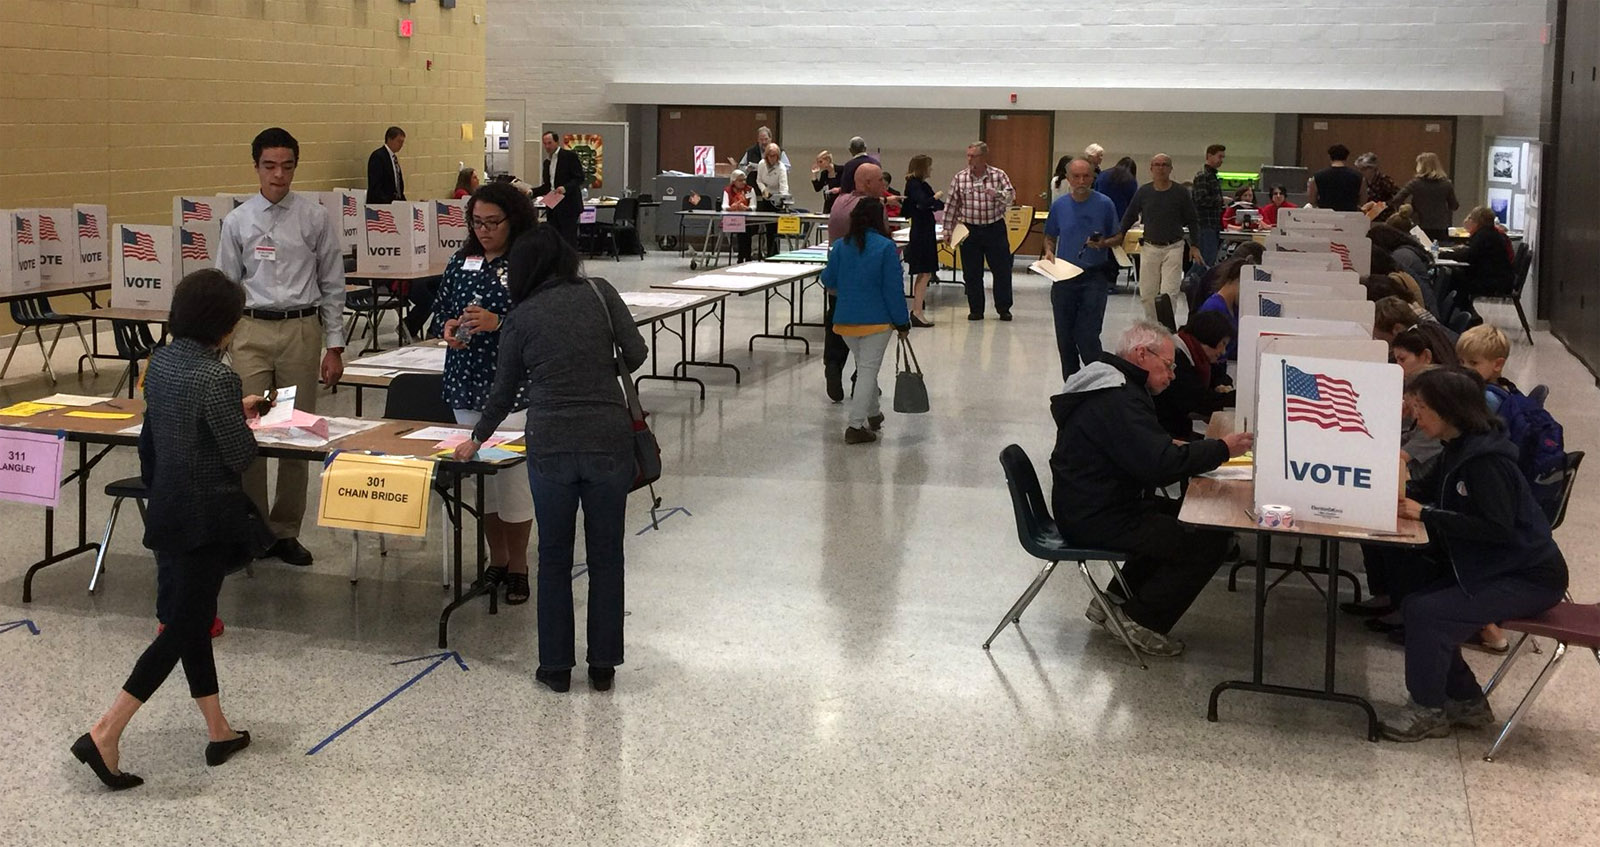 Voters cast their ballots at a Fairfax County polling site in Langley, Virginia on Tuesday, Nov. 8, 2016. Eighty percent of the county's registered voters had cast a ballot as of 6 p.m. (WTOP/Kristi King)